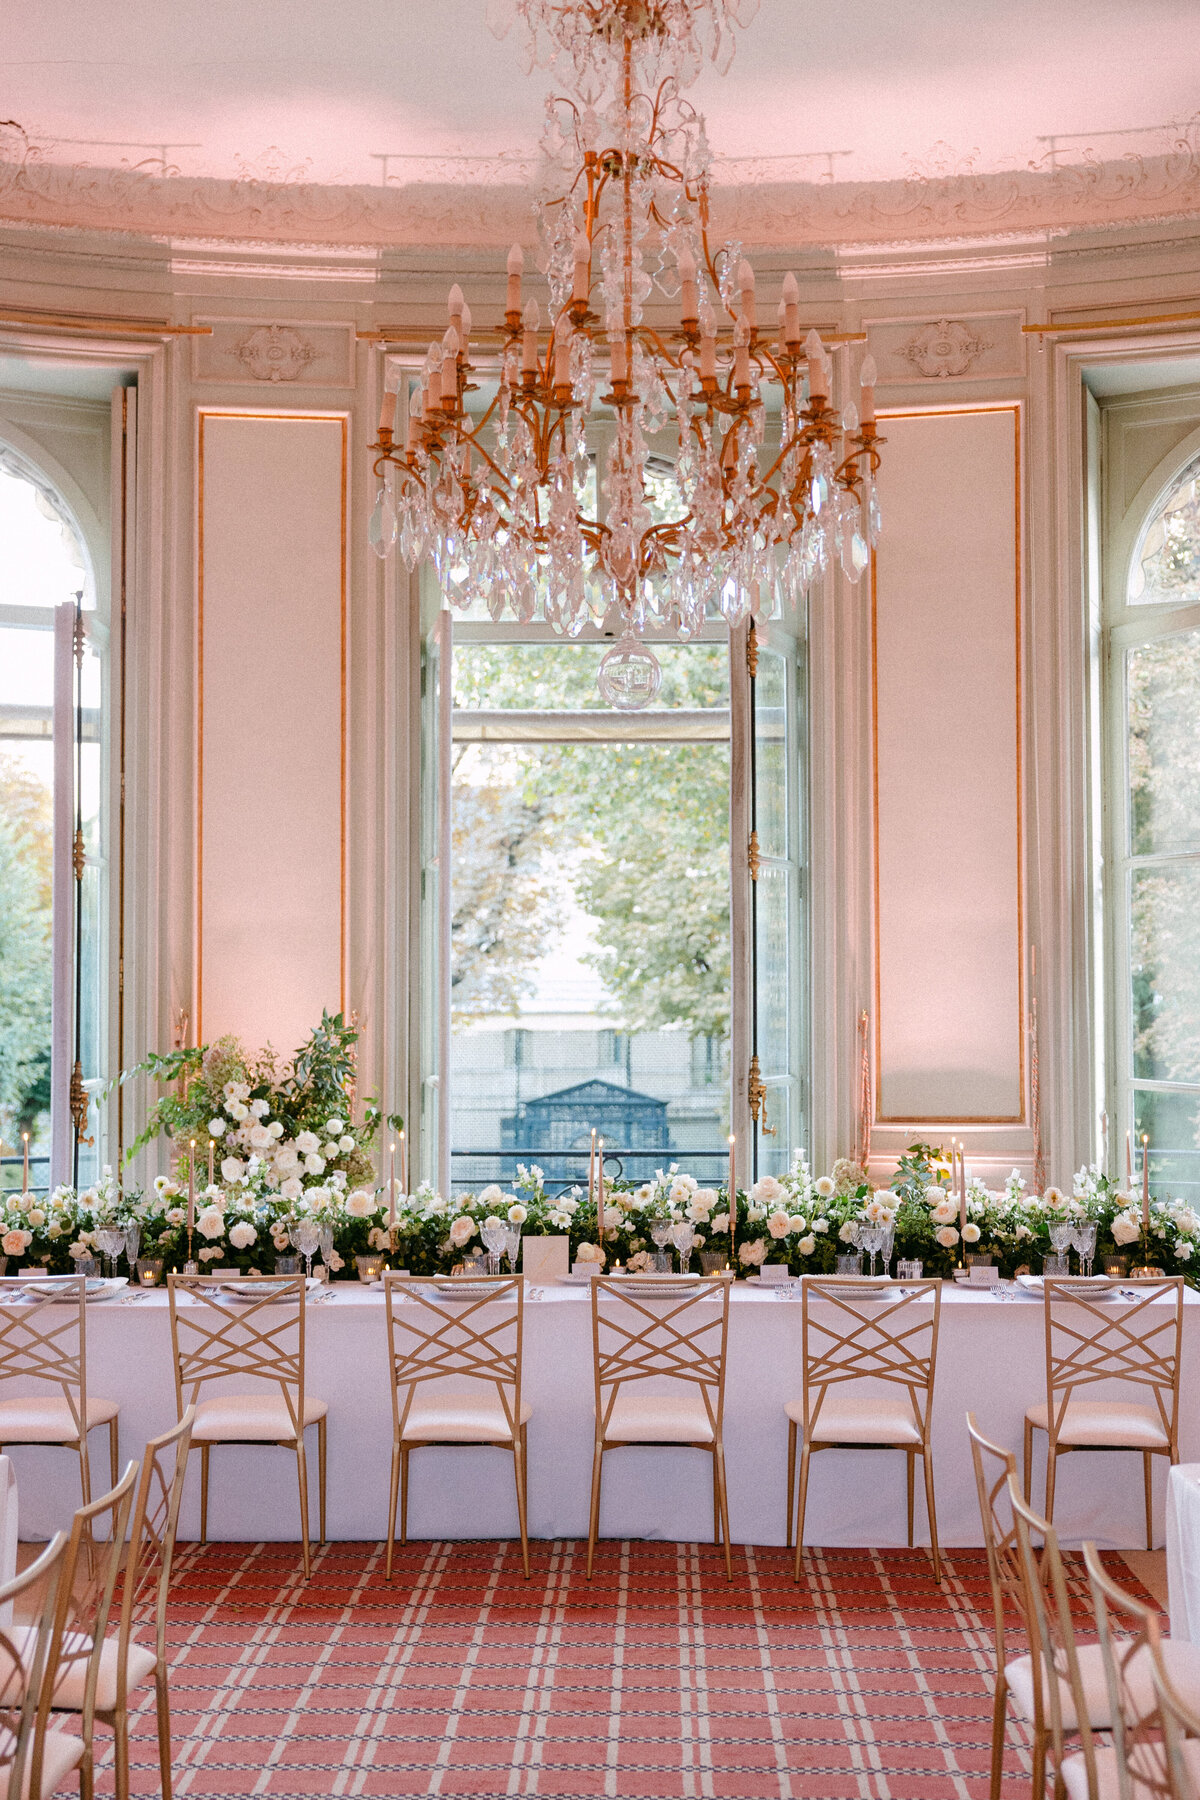 Jennifer Fox Weddings English speaking wedding planning & design agency in France crafting refined and bespoke weddings and celebrations Provence, Paris and destination wd814